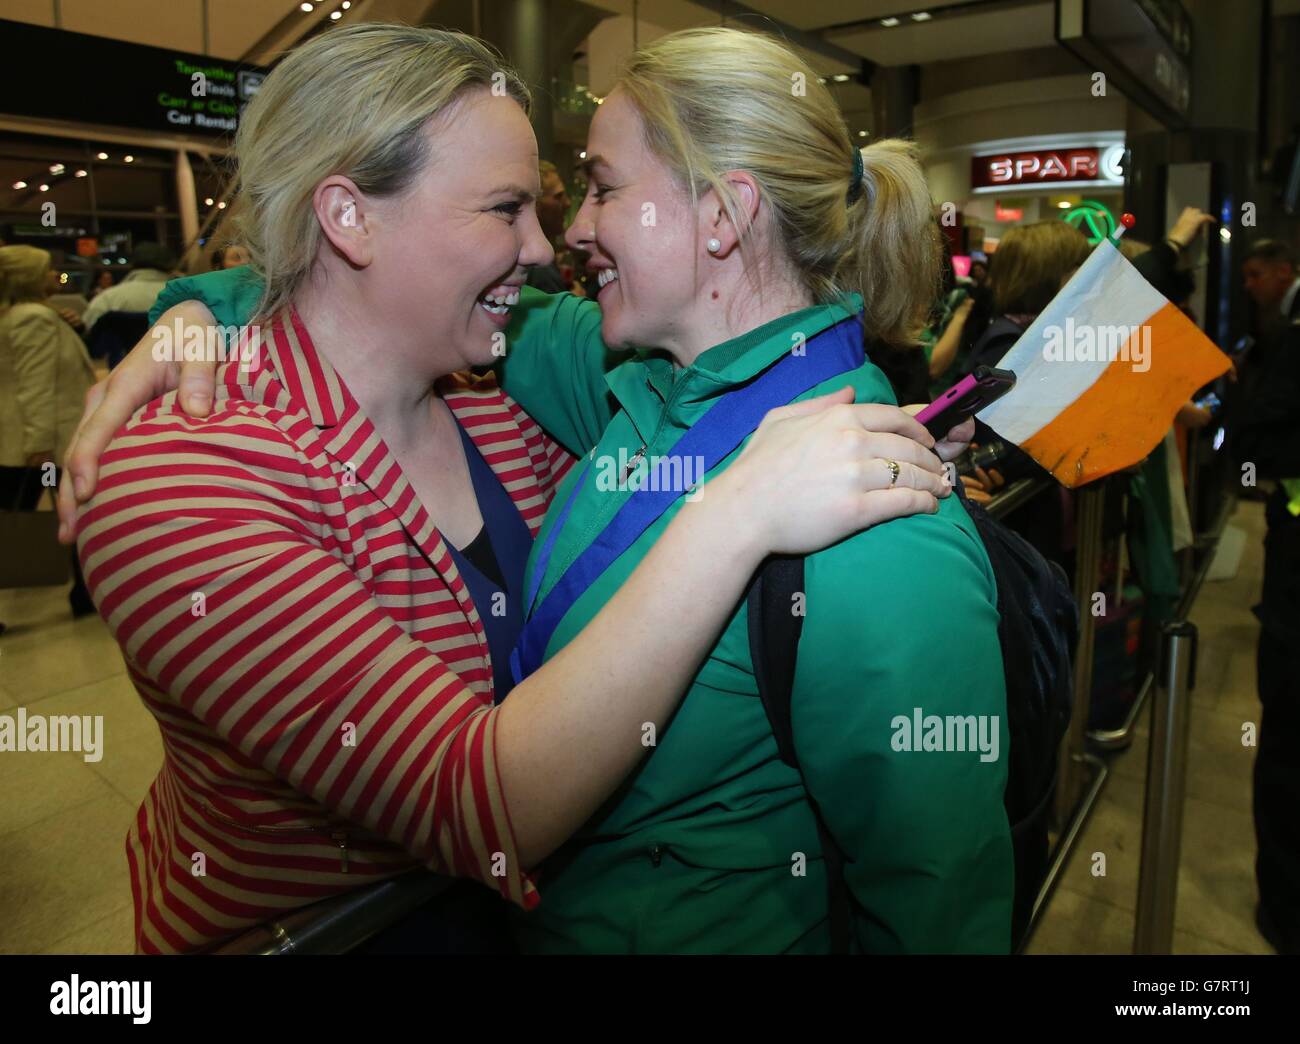 Ireland's womens' rugby captain Niamh Briggs celebrates with her childhood friend, Edel Fitzsimons (left), as the team arrives at Dublin airport after winning the Six Nations trophy in a 73-3 victory over Scotland in Glasgow. Stock Photo